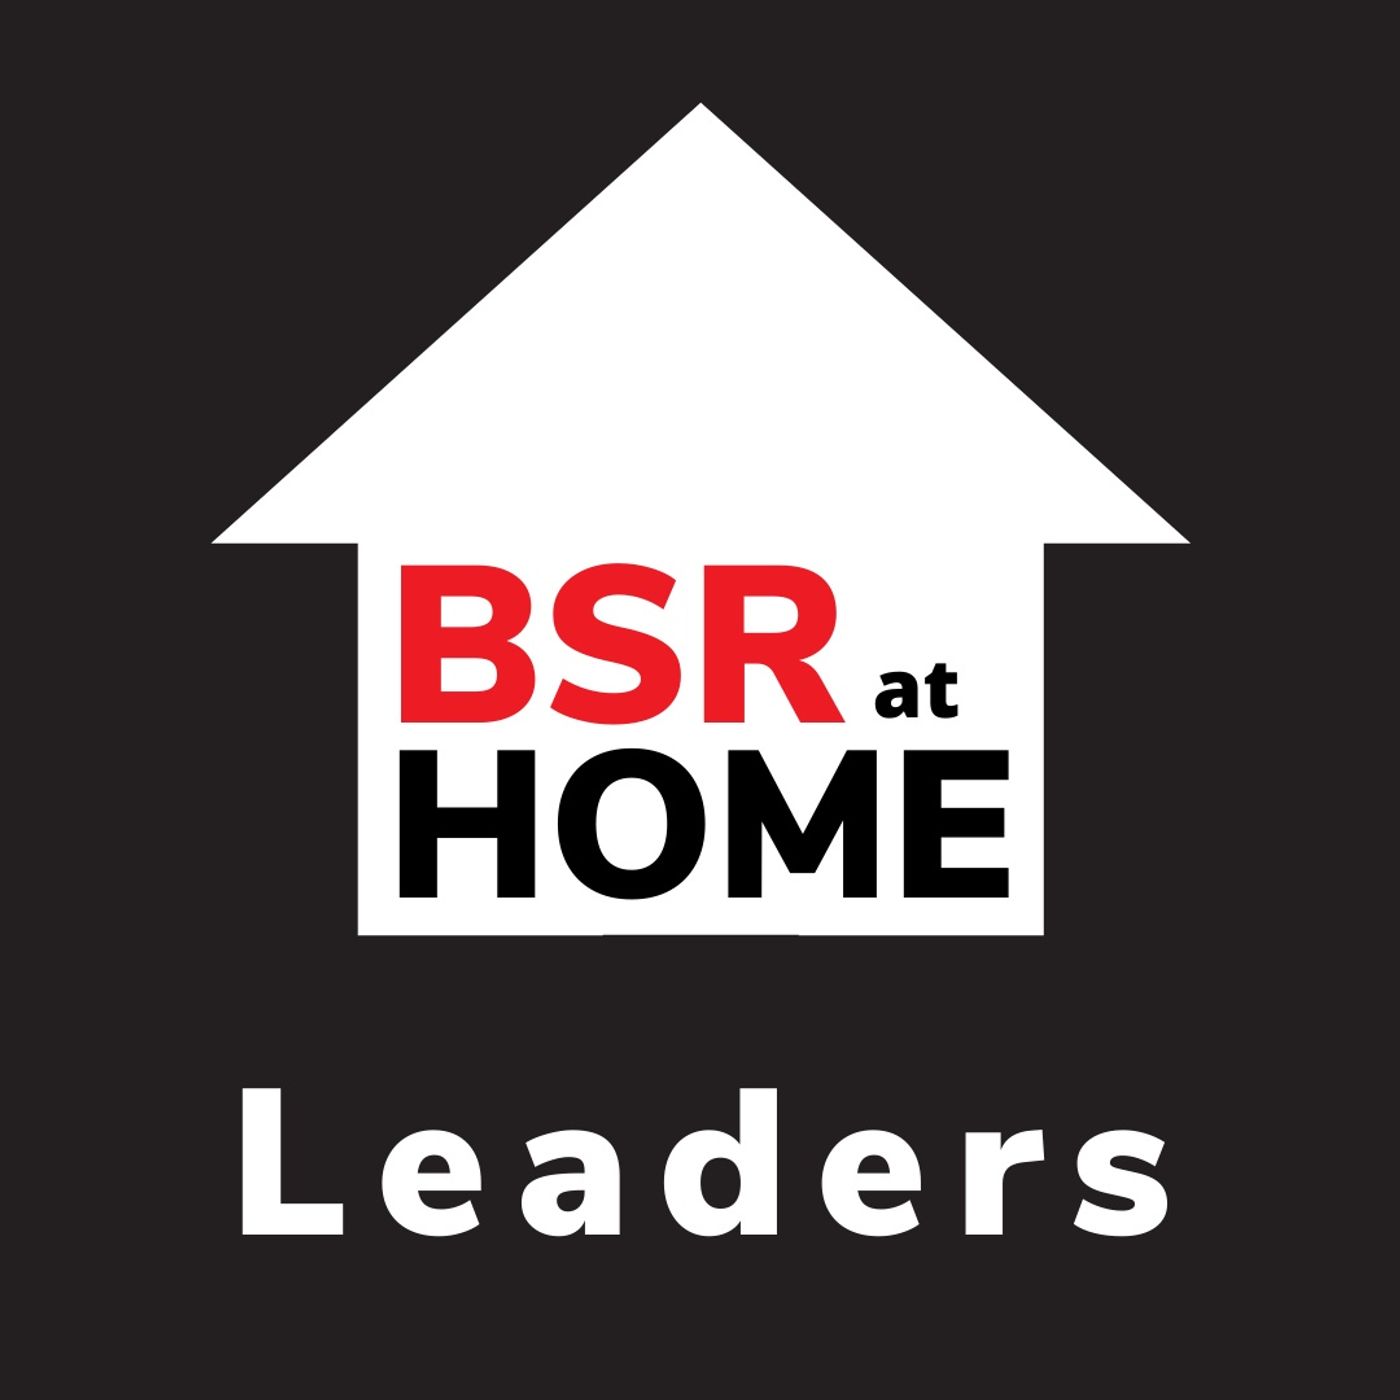 BSR at Home - Leaders